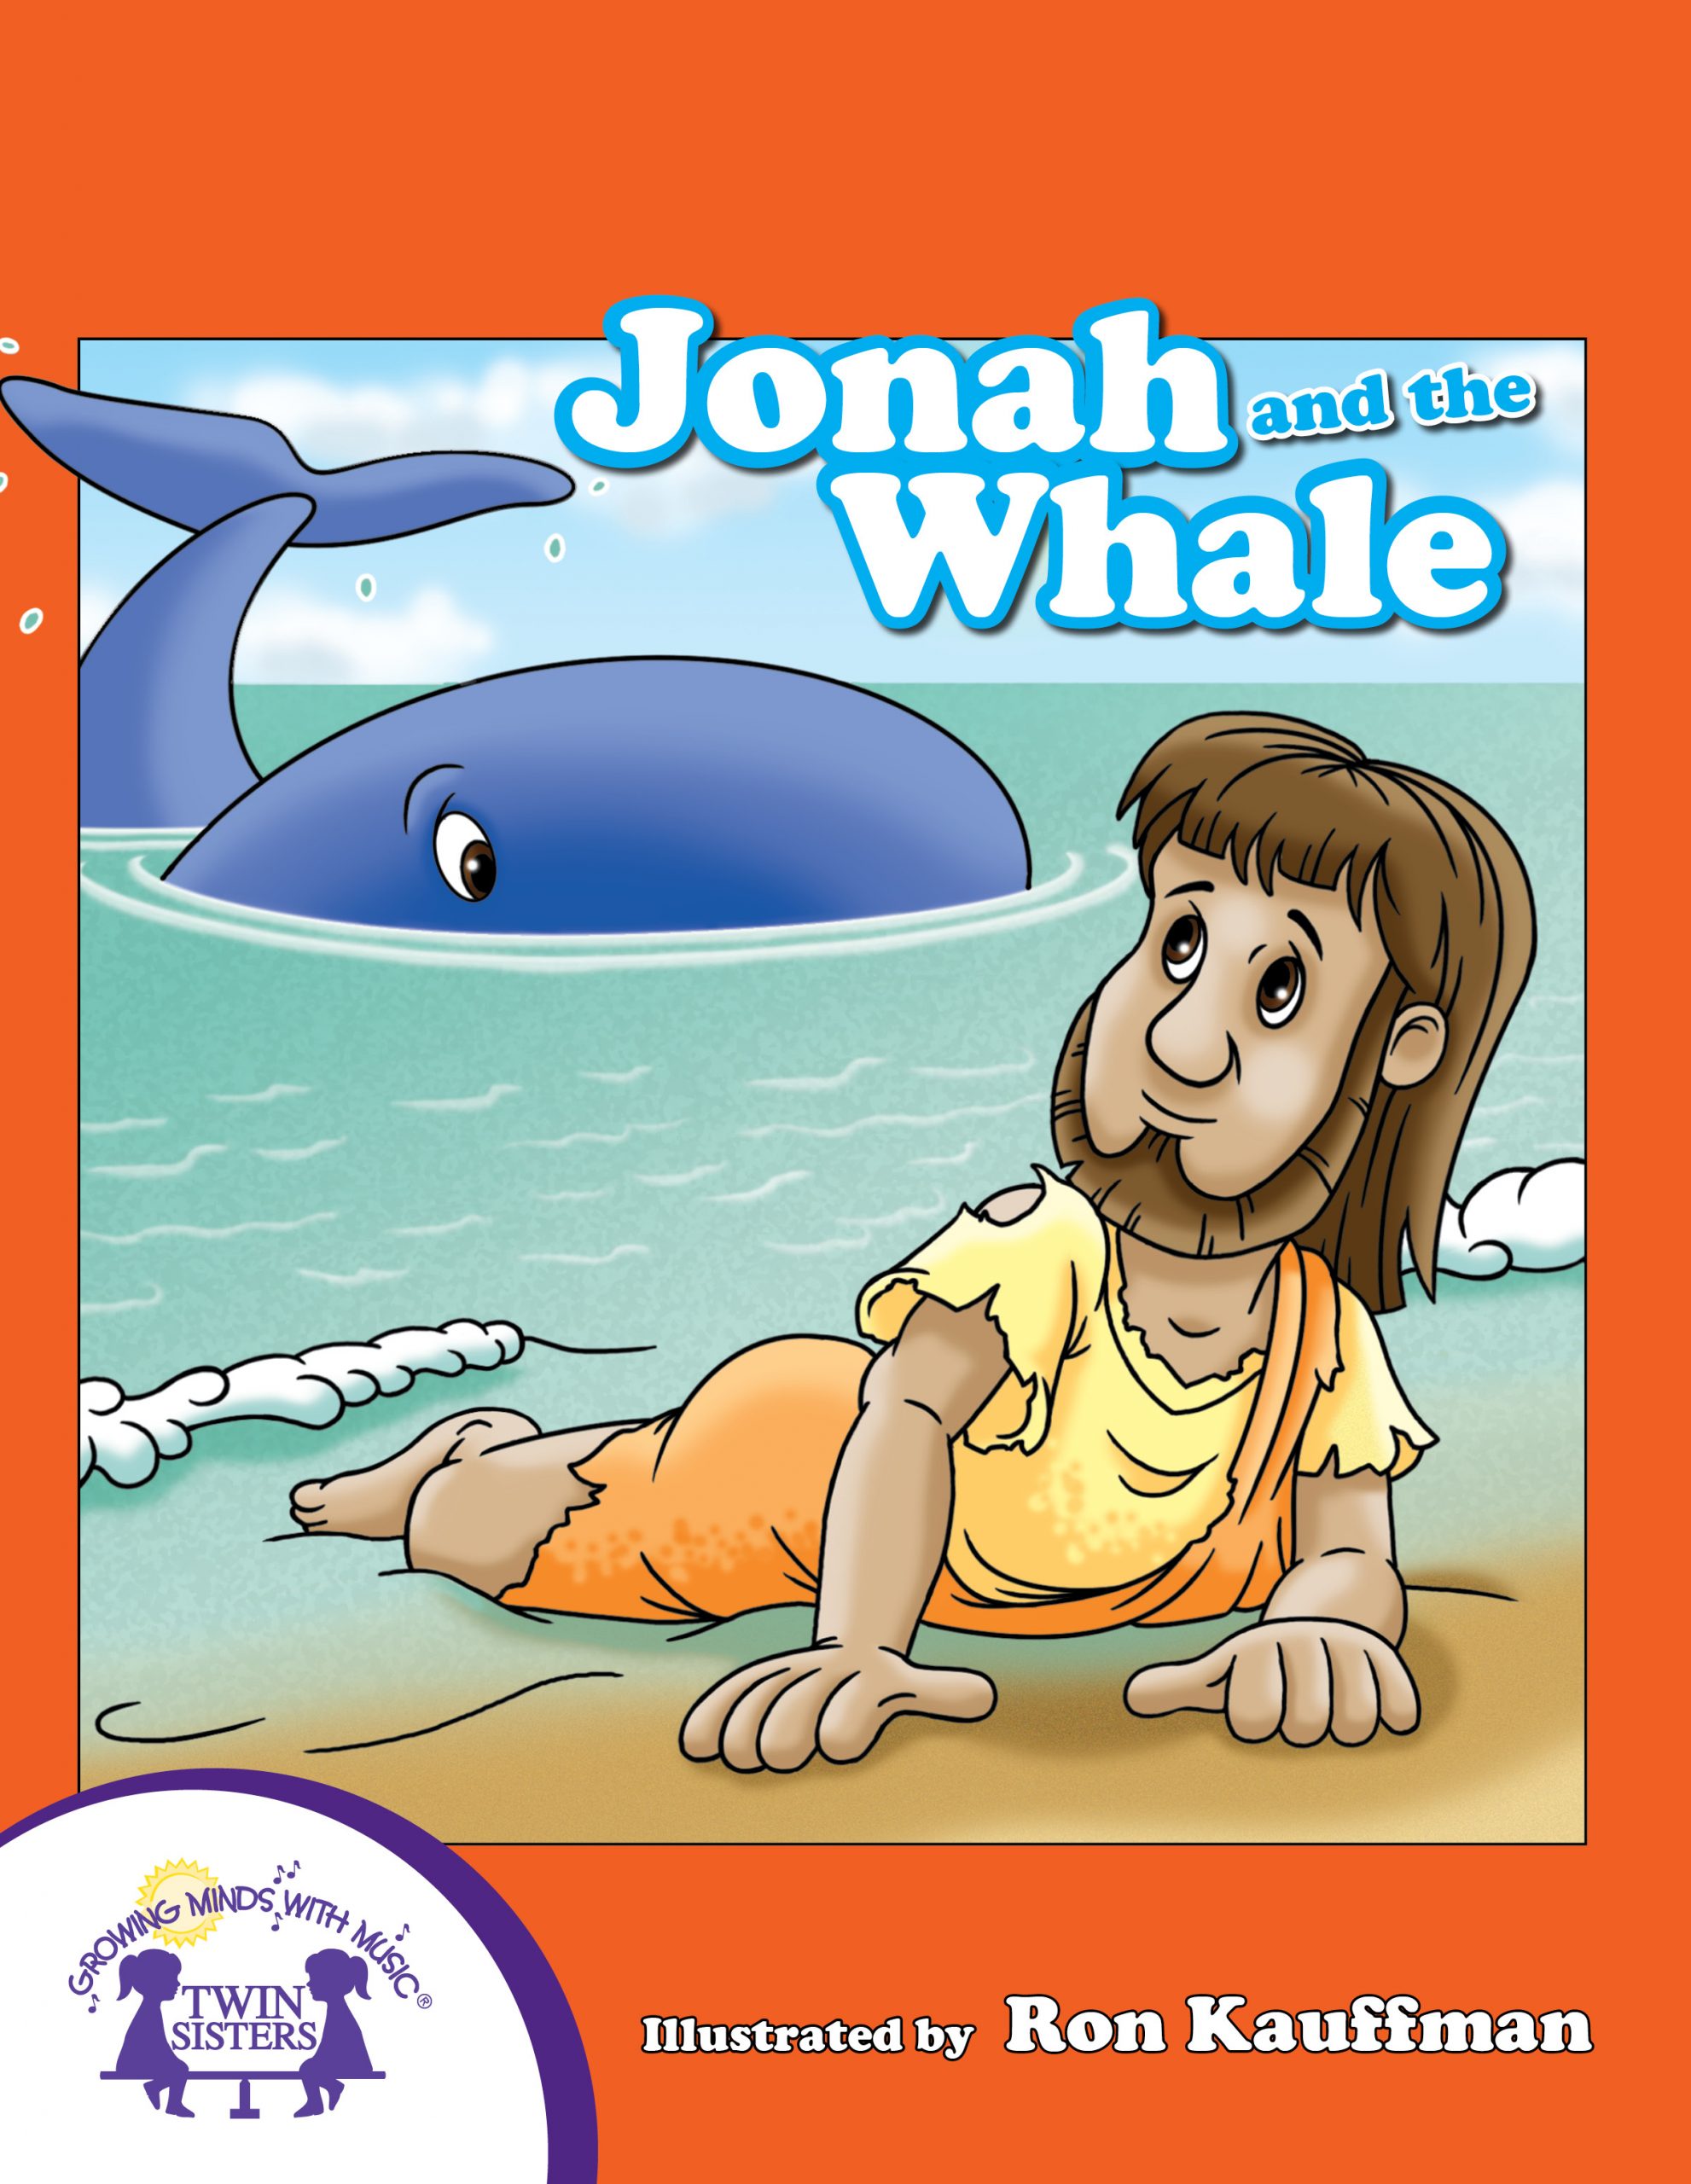 jonah-and-the-whale-twin-sisters